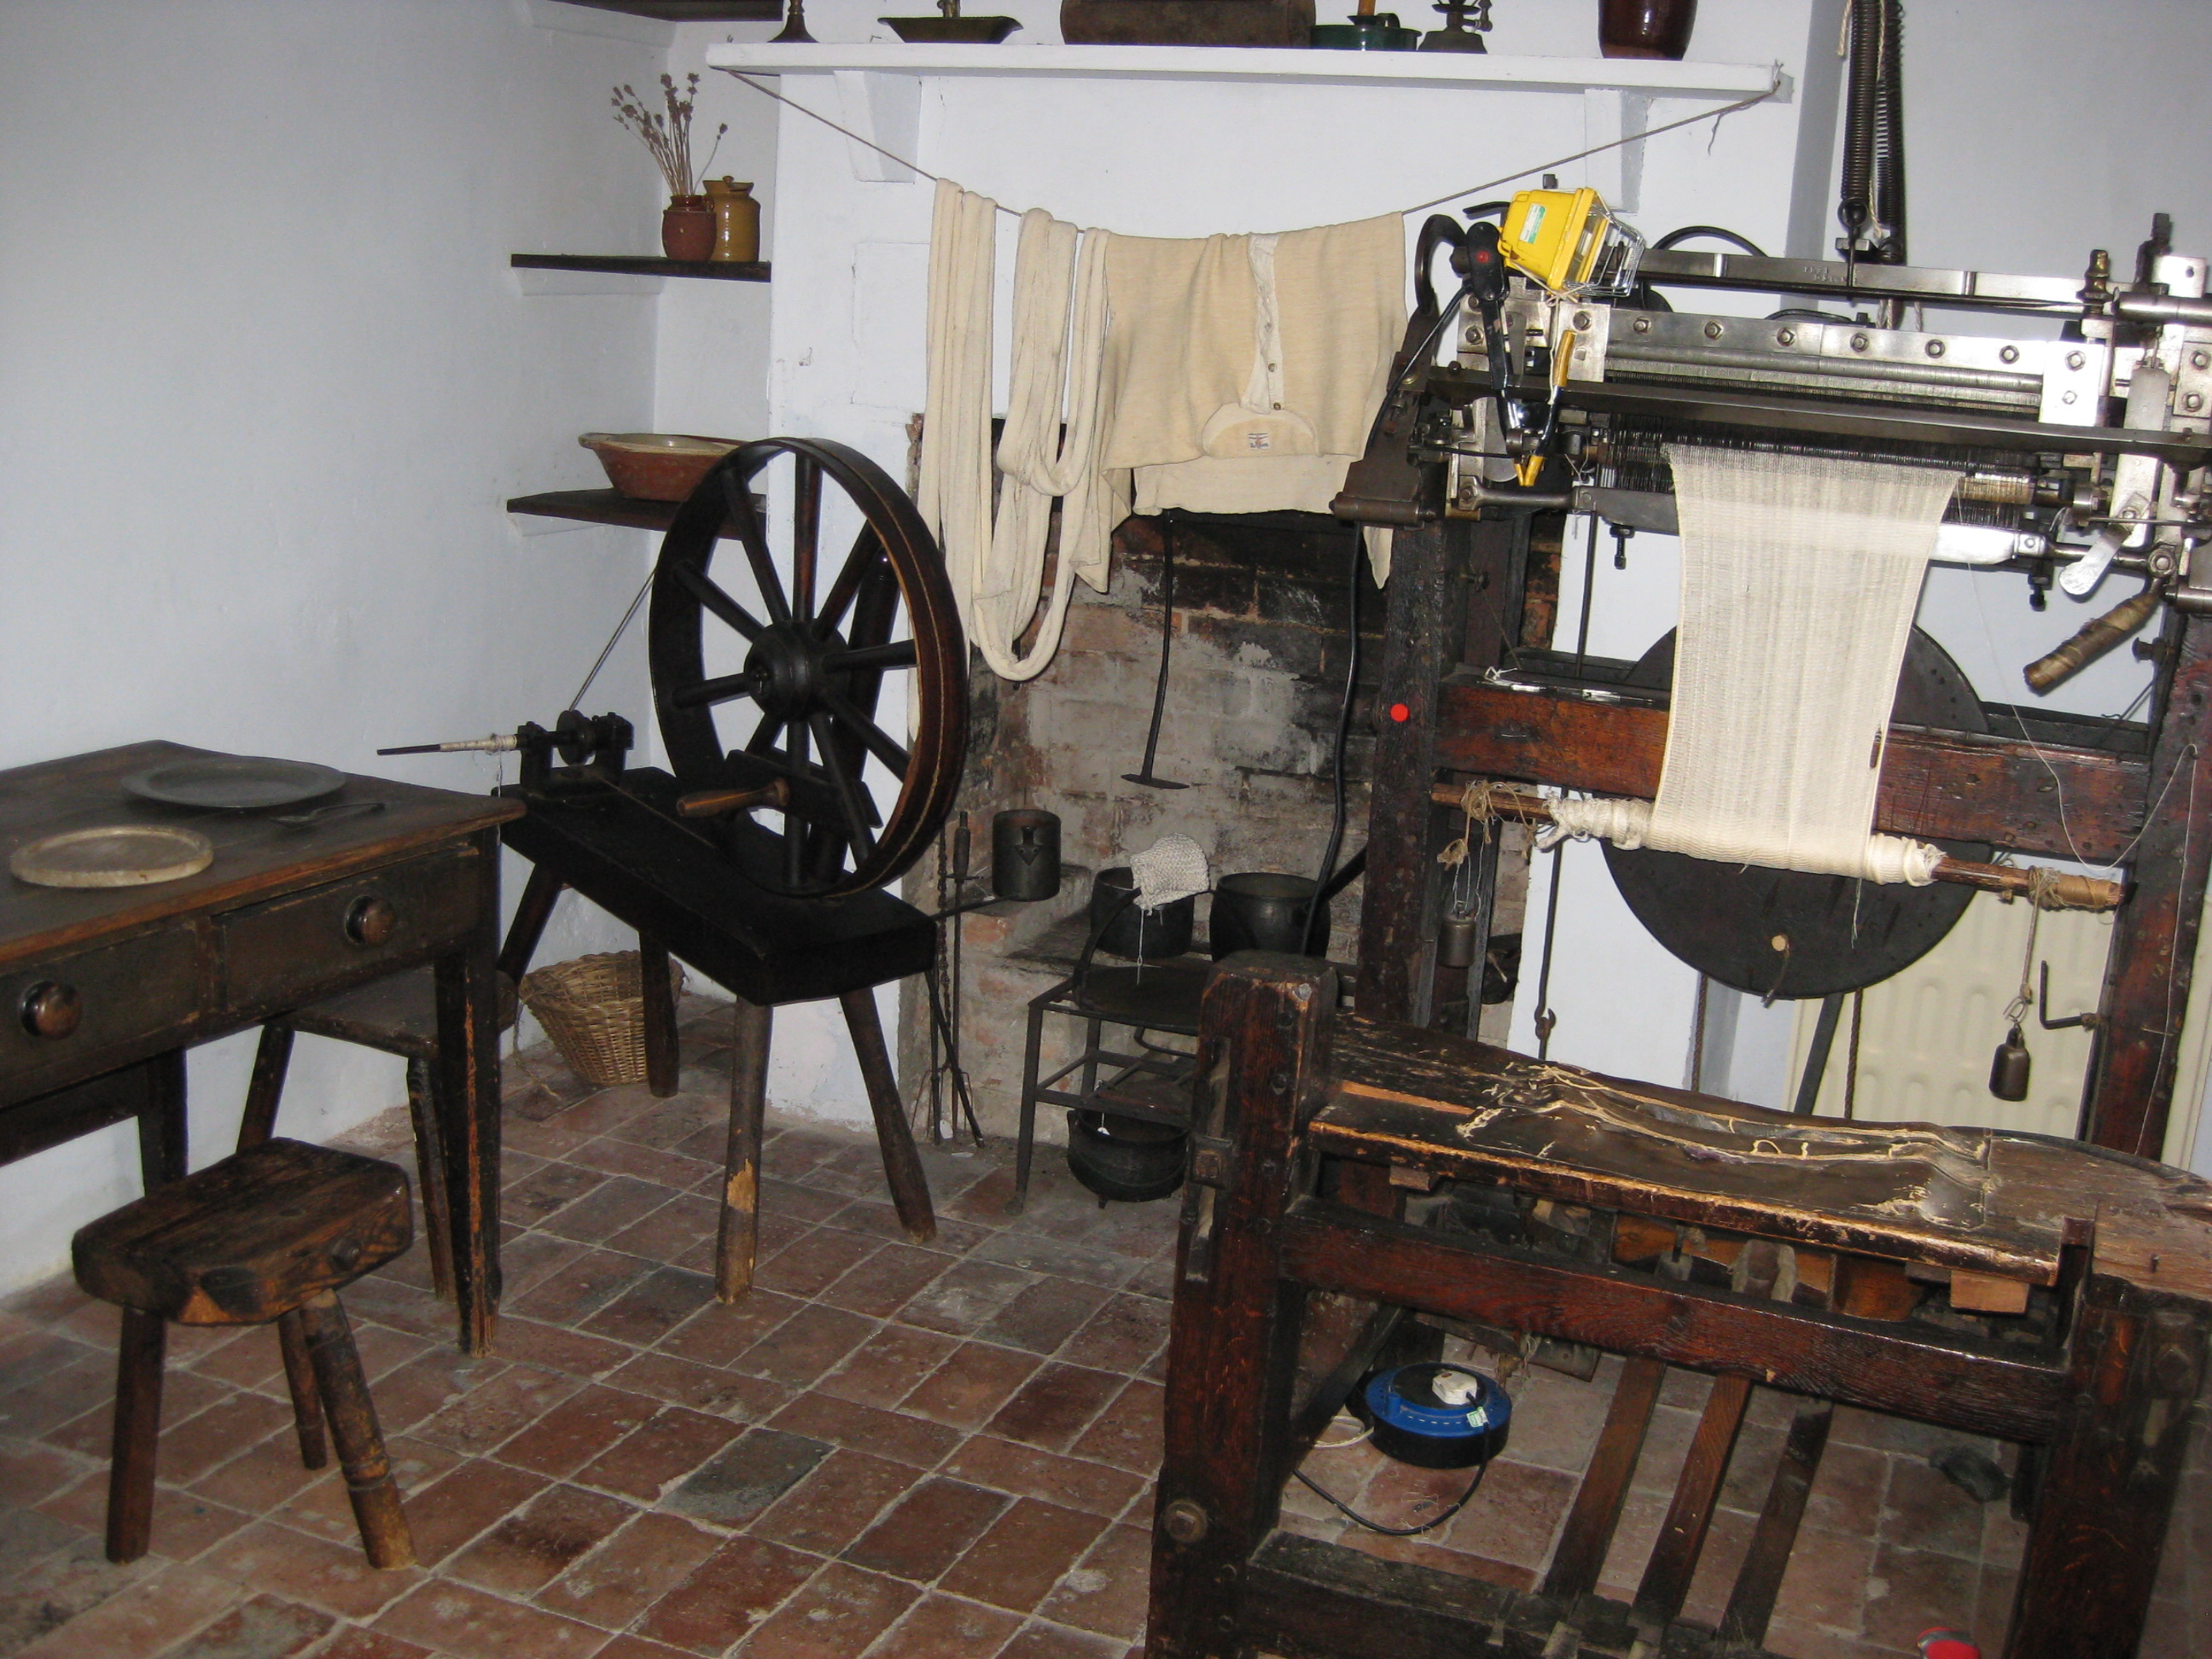 A knitting frame and spinning wheel in one of the cottages at the Framework Knitters Museum